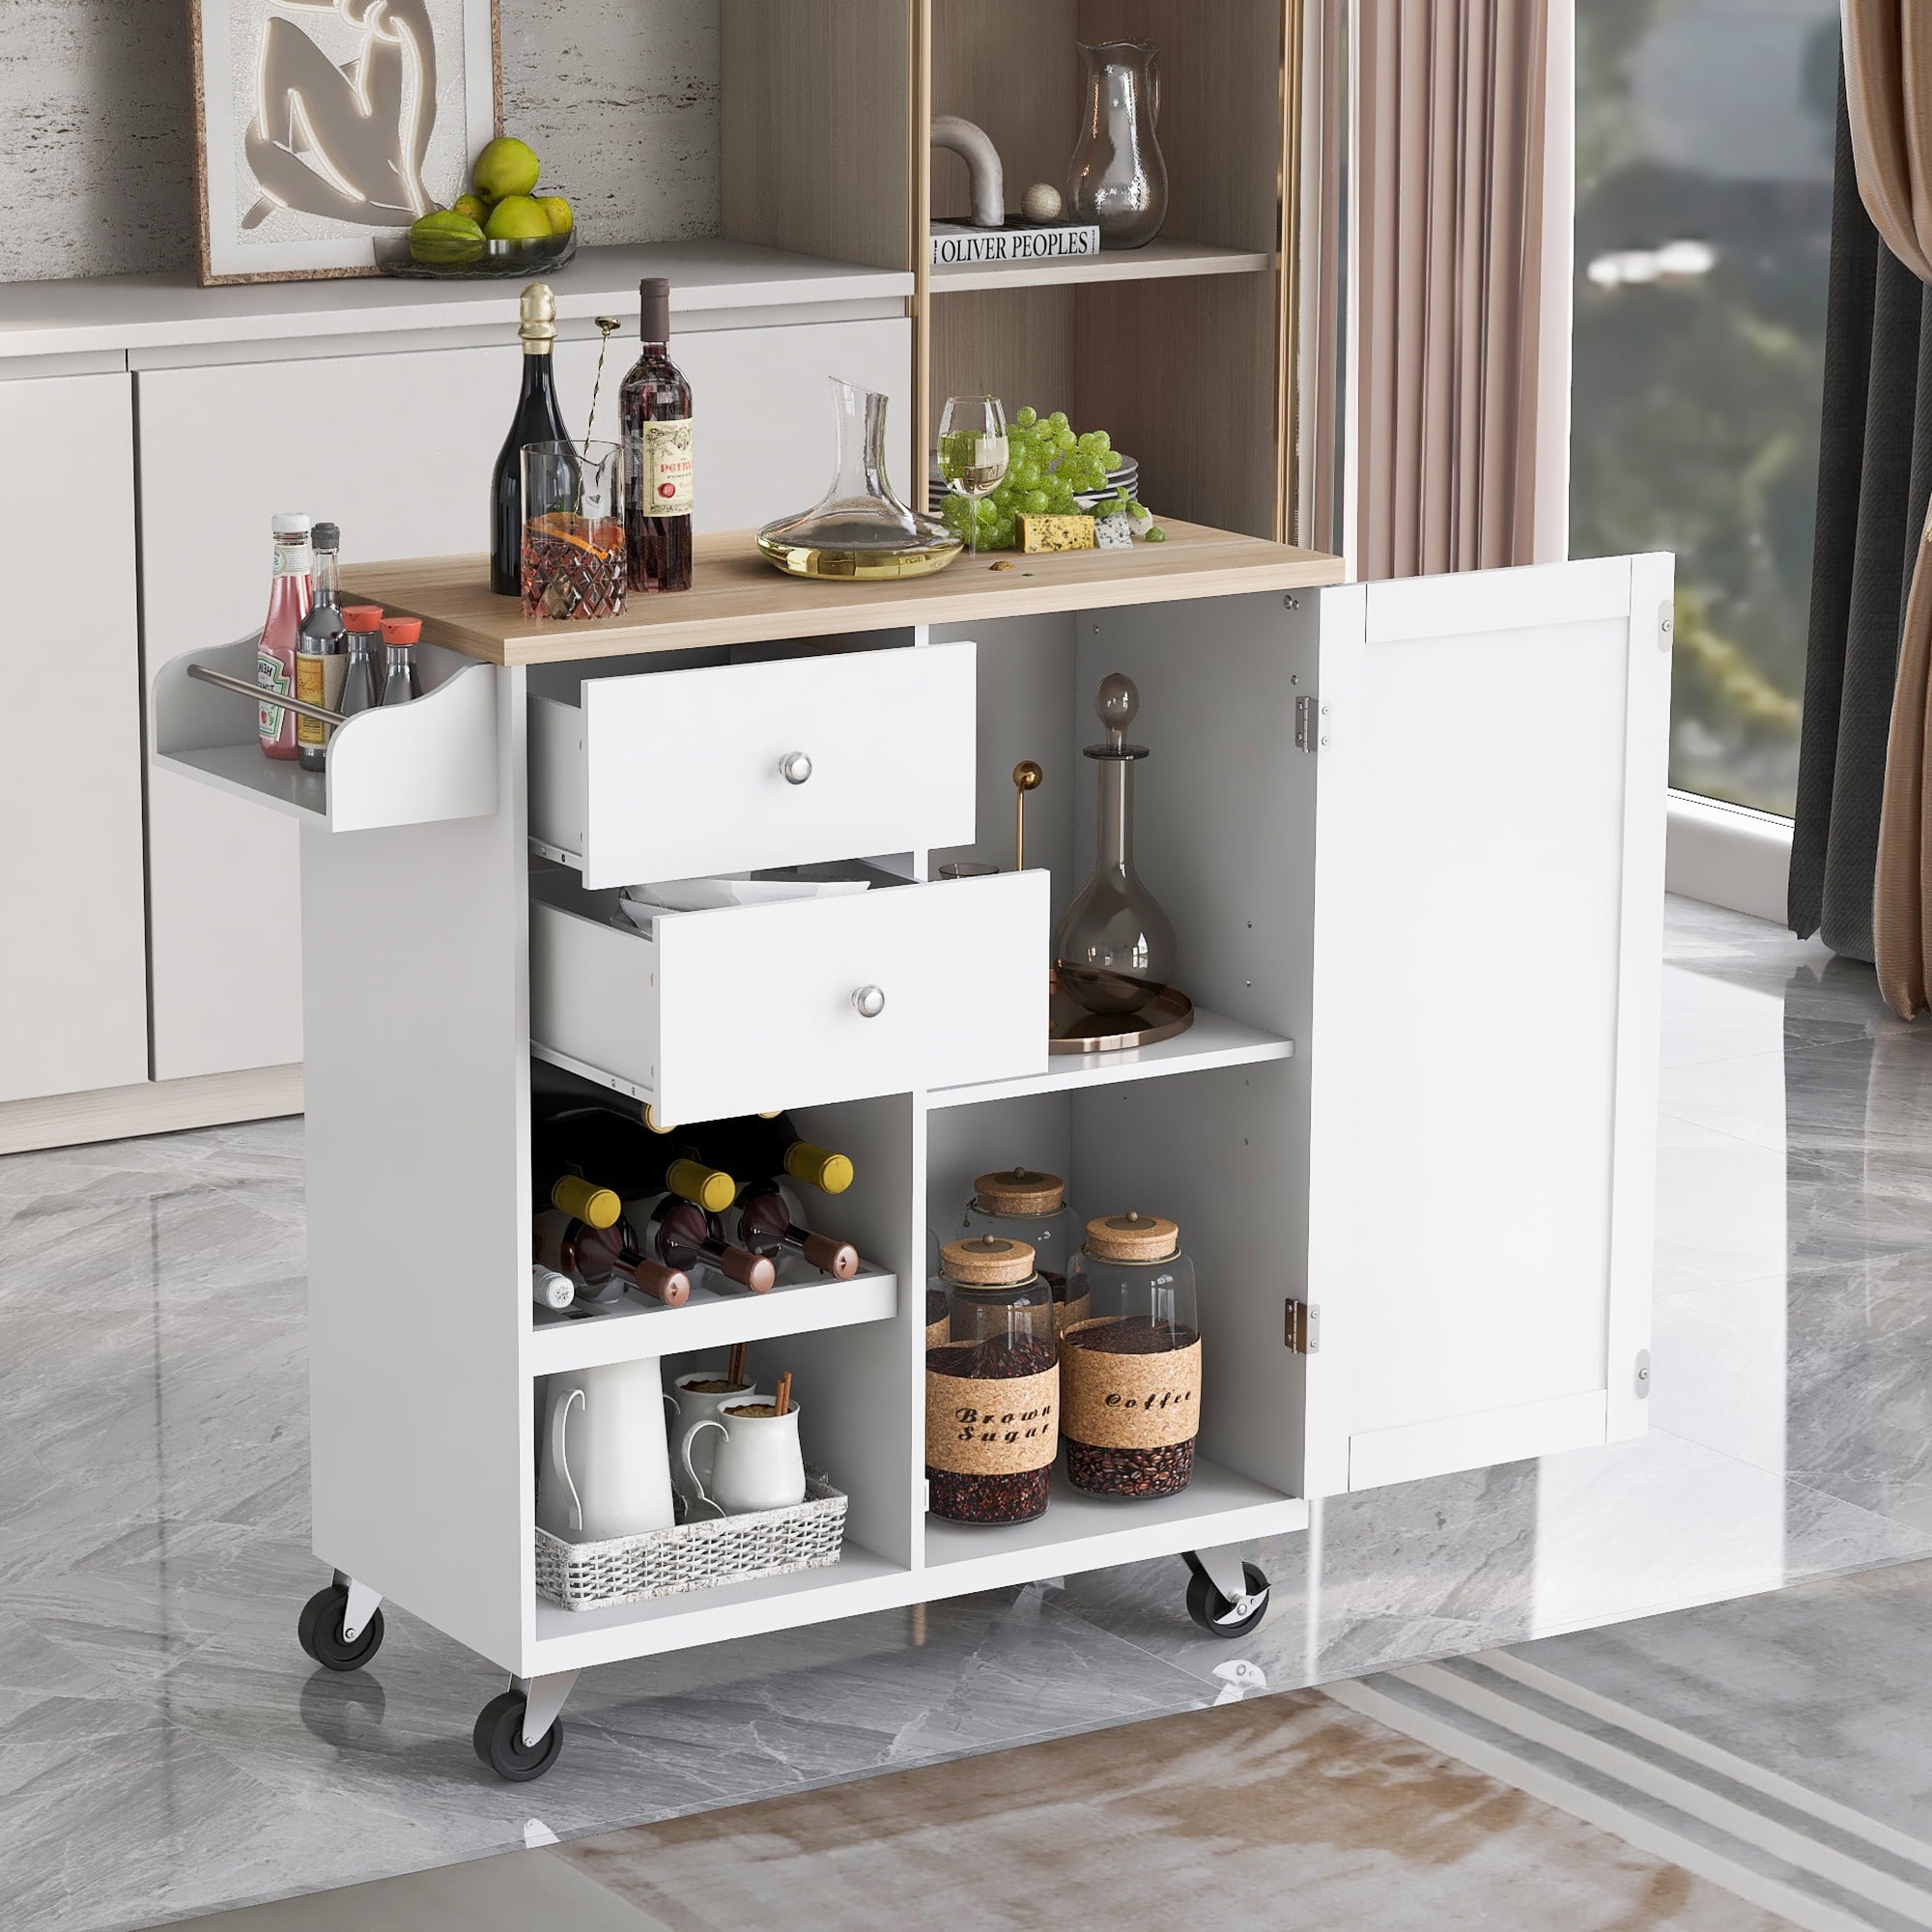 Hombay Modern Mobile Kitchen Island with Storage， Wood Kitchen Cart Organizer with Drawers Door Shelves and Spice Rack， 4 Wheels Rolling Lockable